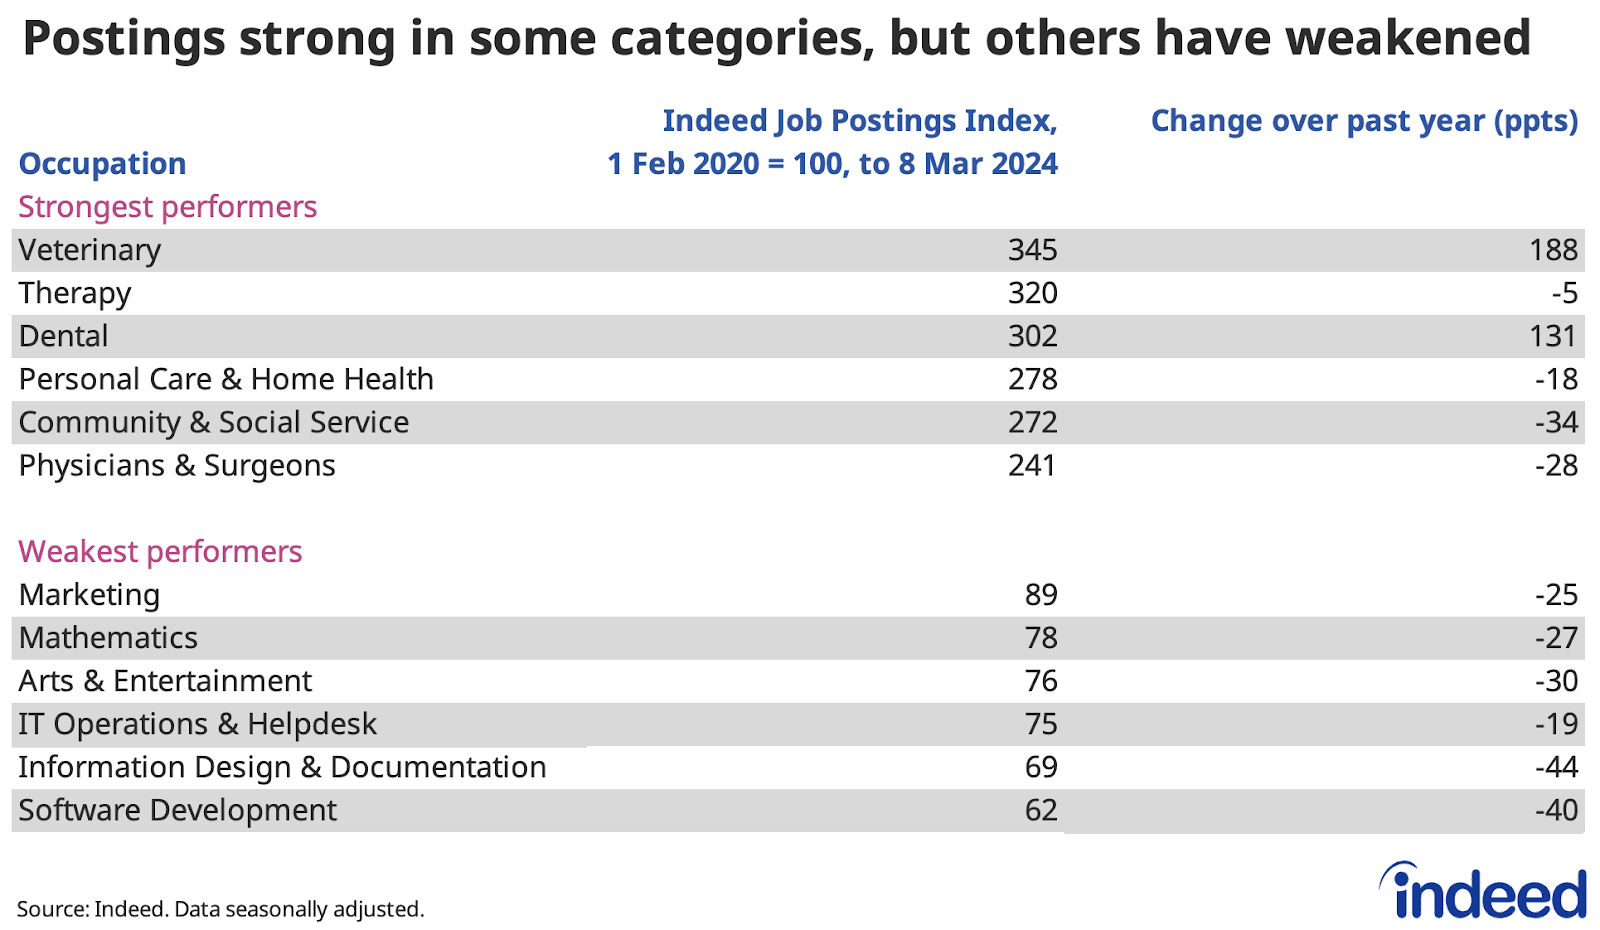 Table titled “Postings strong in some categories, but others have weakened.” Indeed compared the trend in Irish job postings, between 1 February, 2020, and 8 March 2024 across selected occupational categories. The strongest performers were veterinary and therapy, while the weakest performers were software development and information design & documentation.